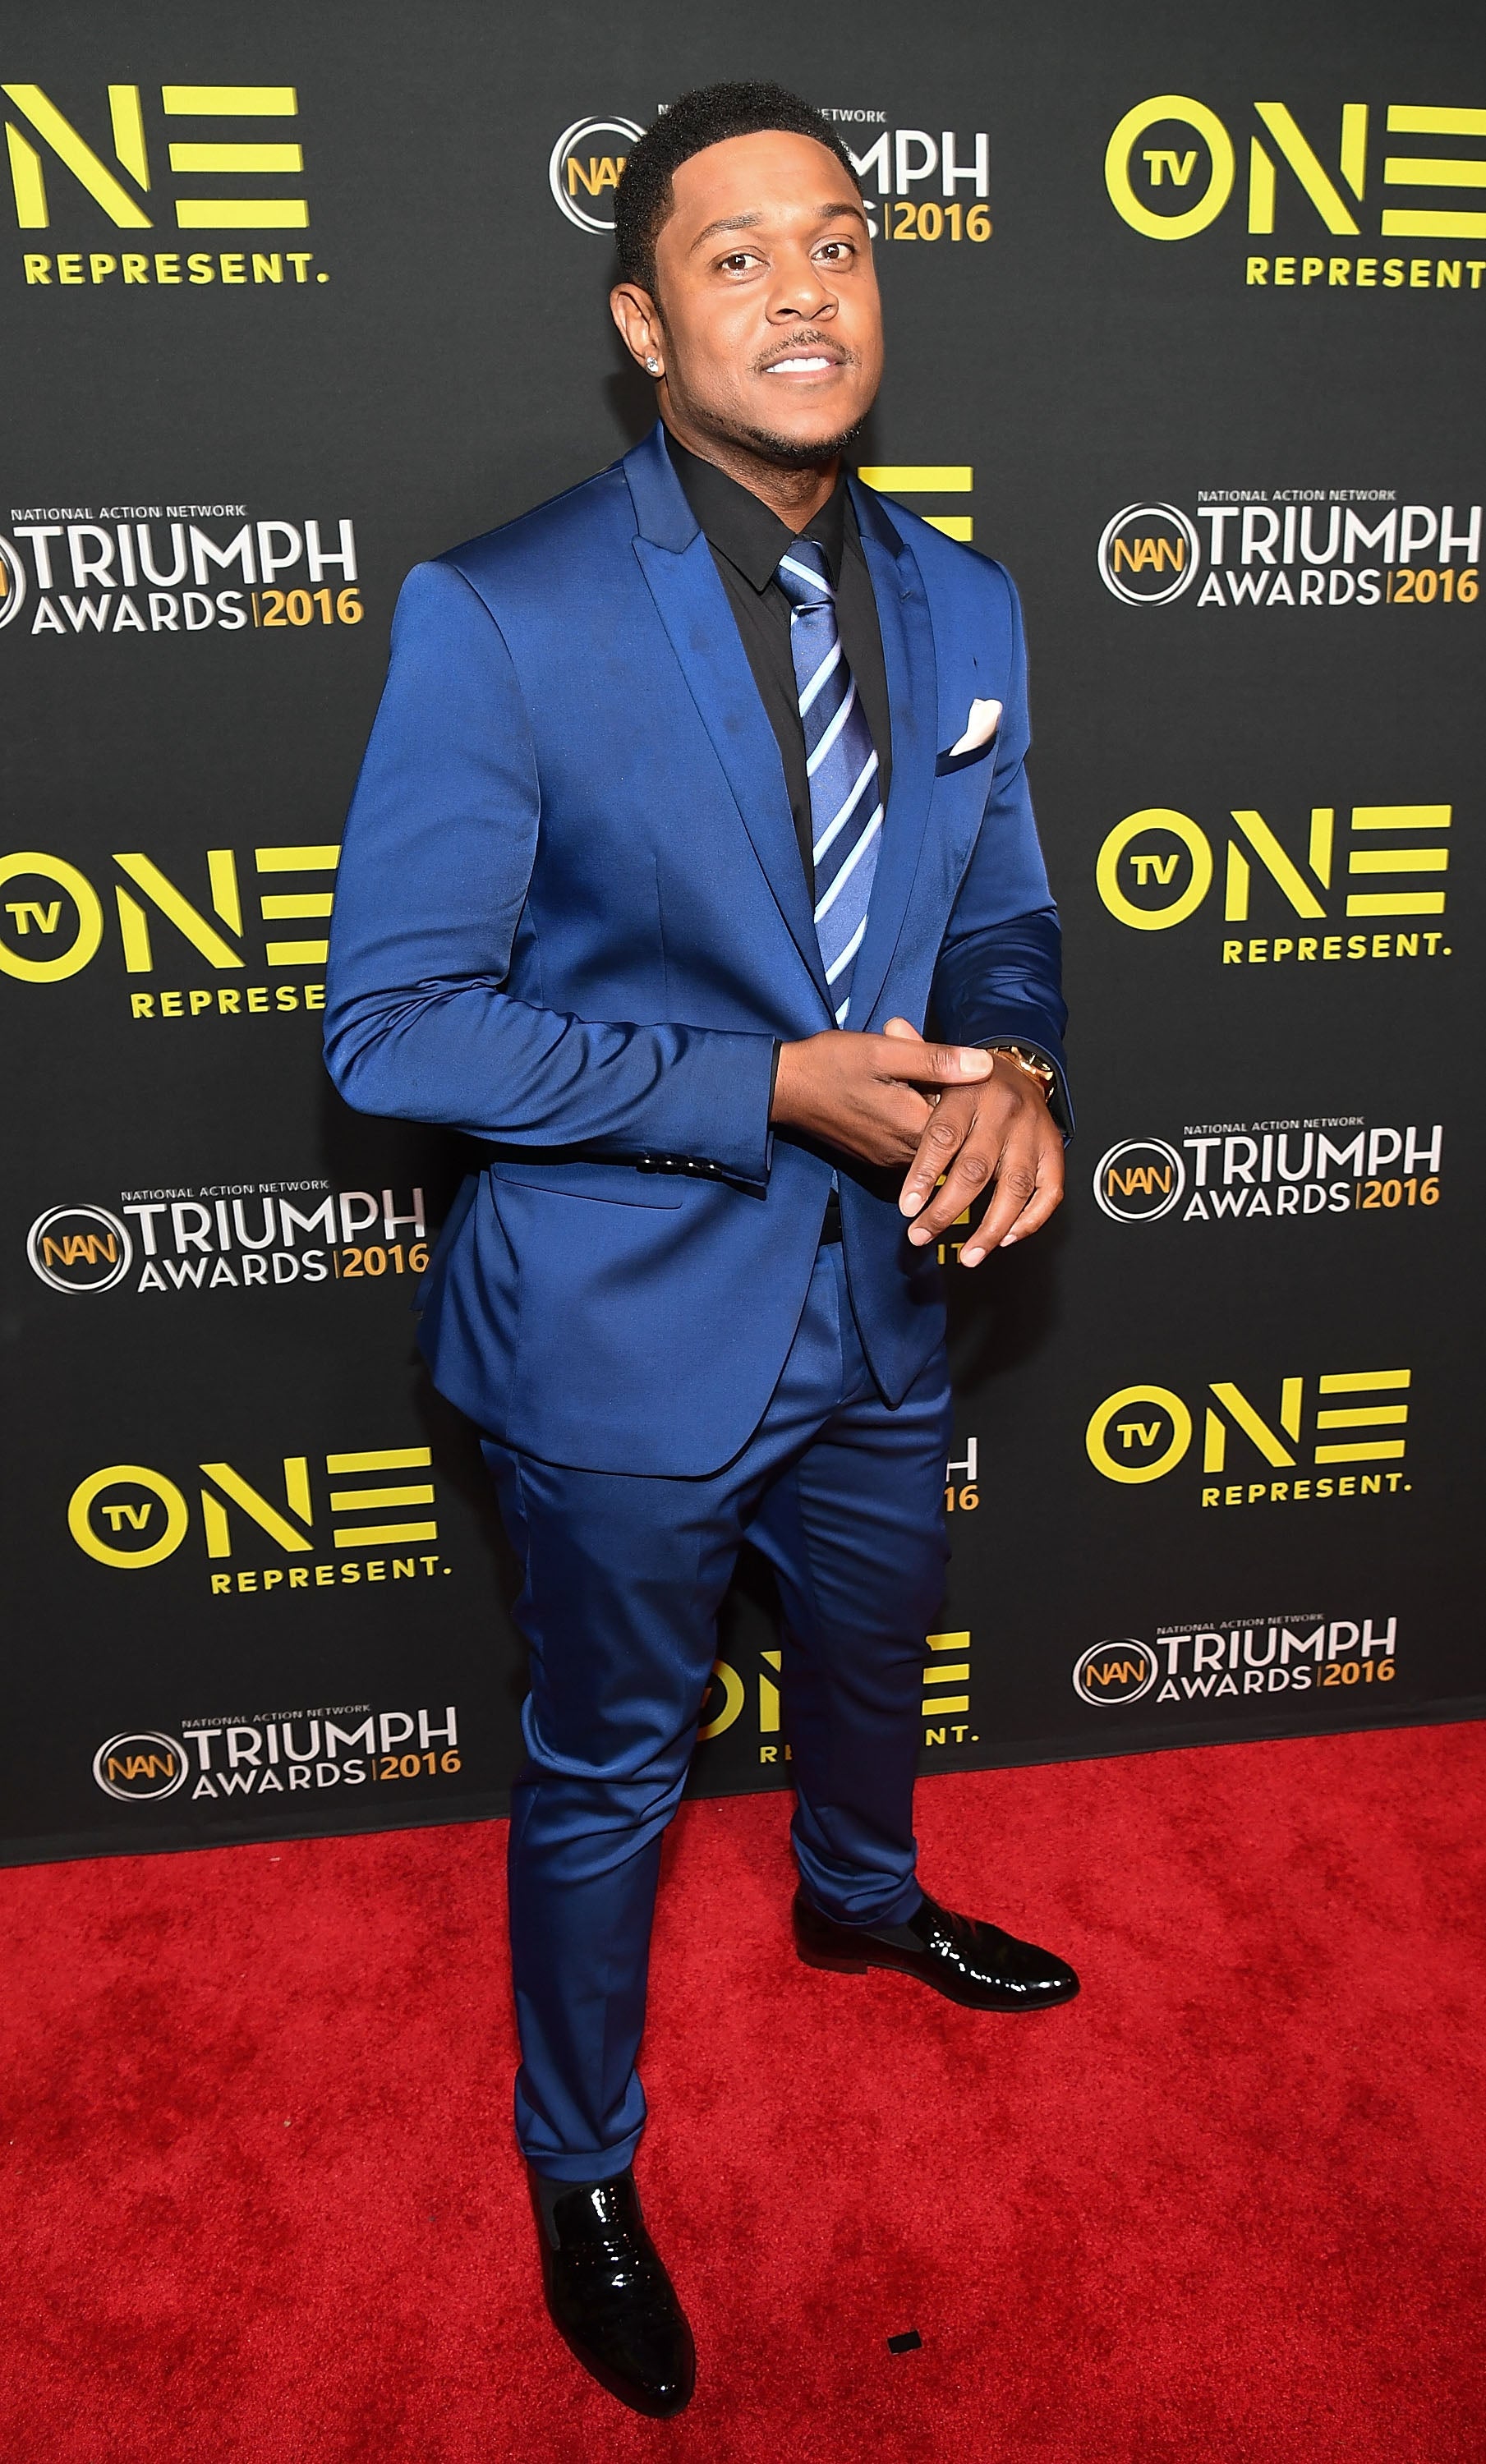 Black Excellence at the 2016 Triumph Awards
